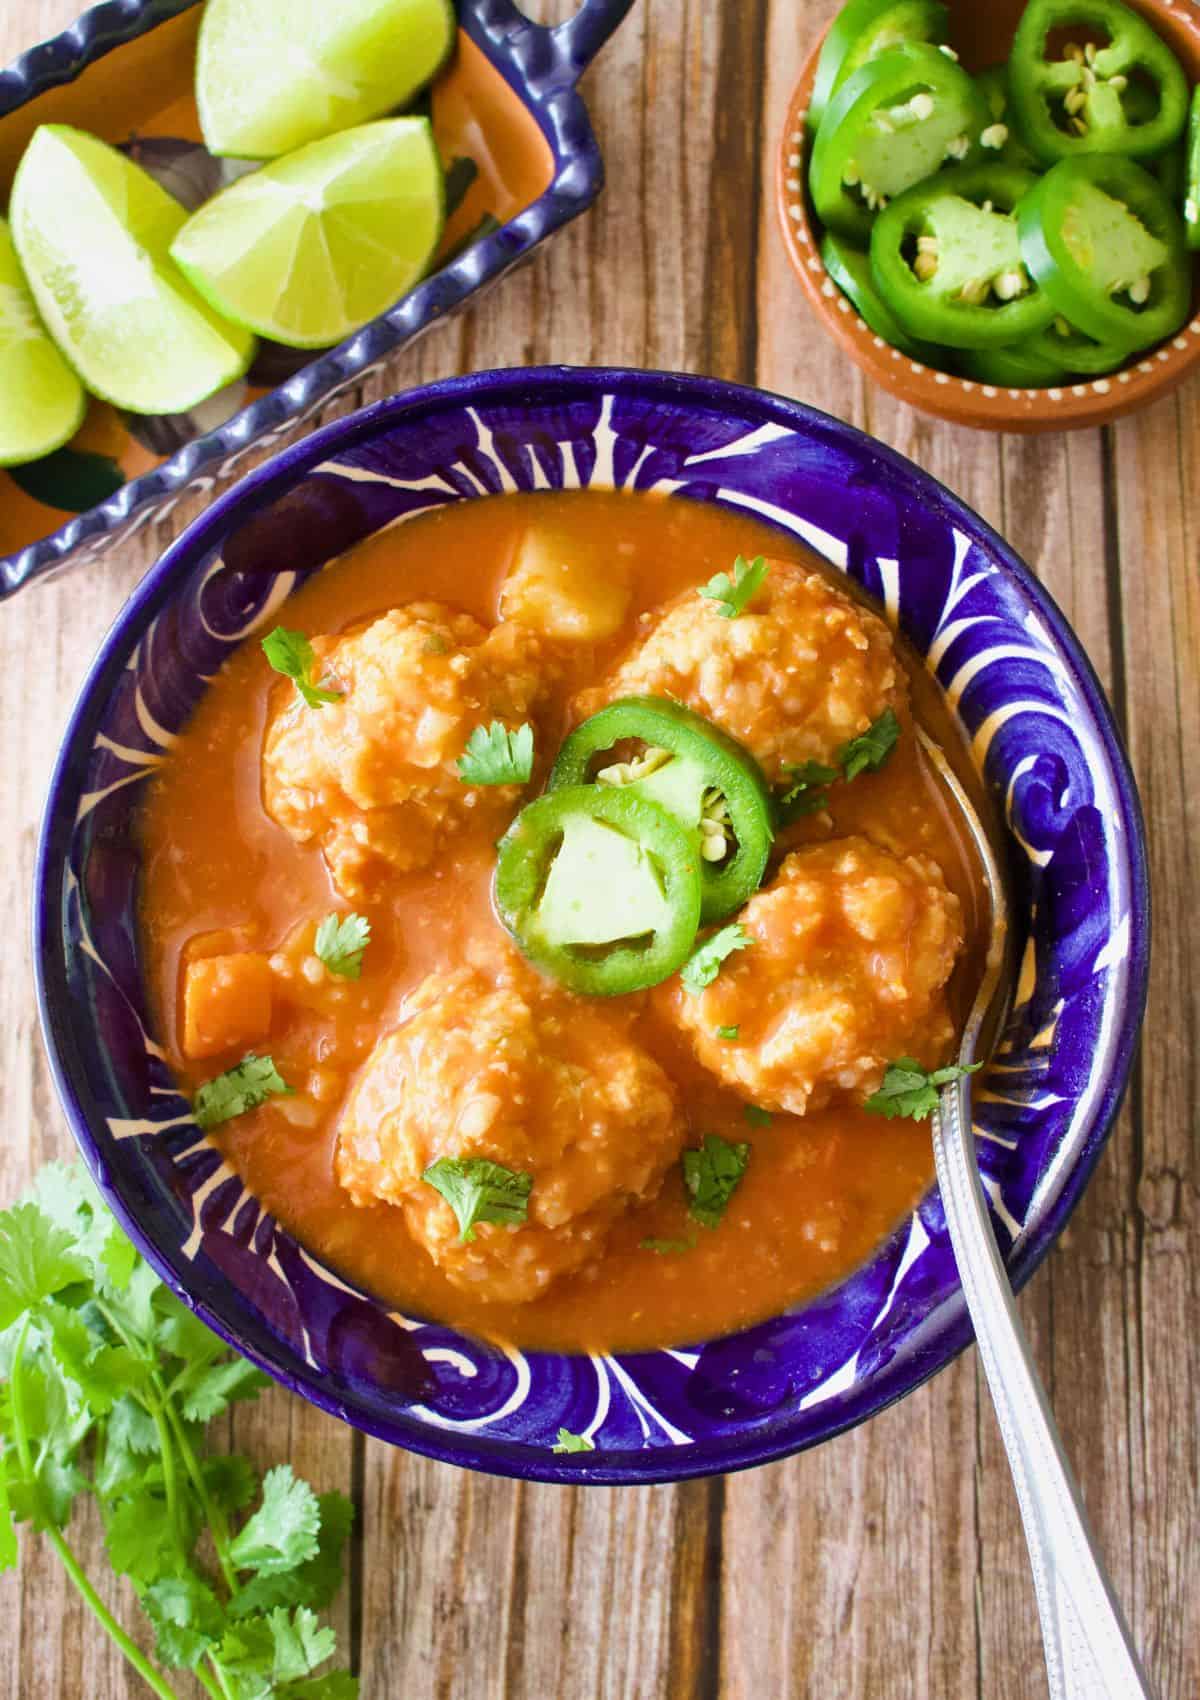 Albondigas de Pollo (or Chicken Meatball Soup) served in a decorative Mexican blue plate and topped with cilantro and sliced jalapeno.